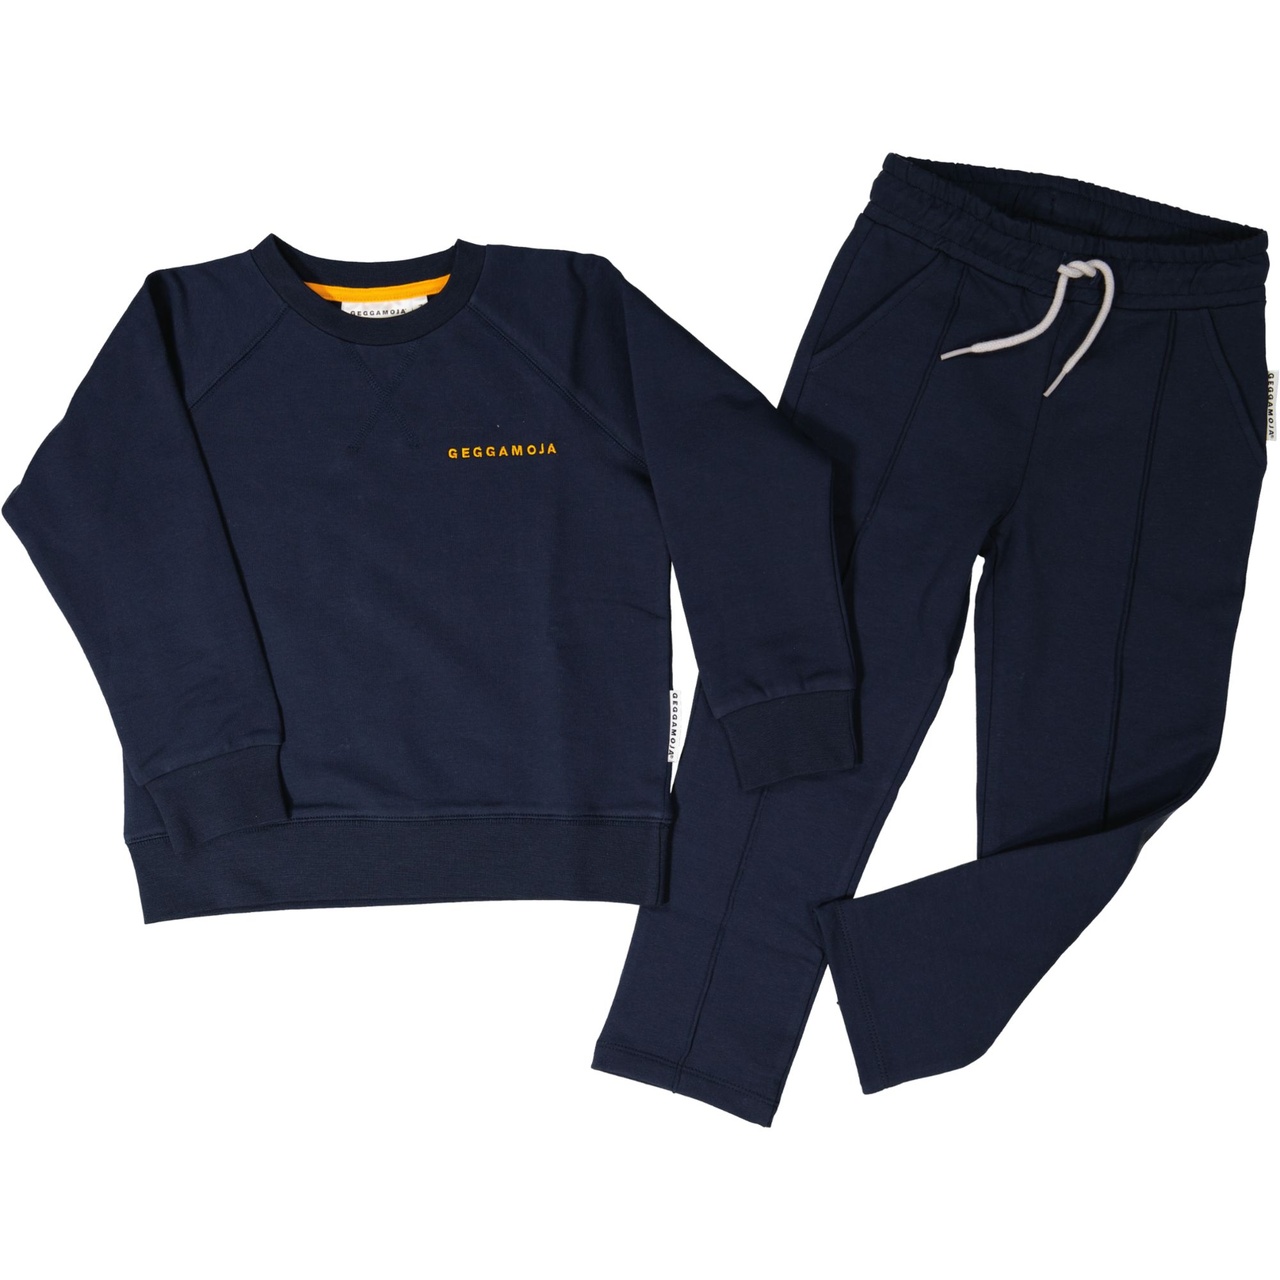 College trousers Navy  110/116